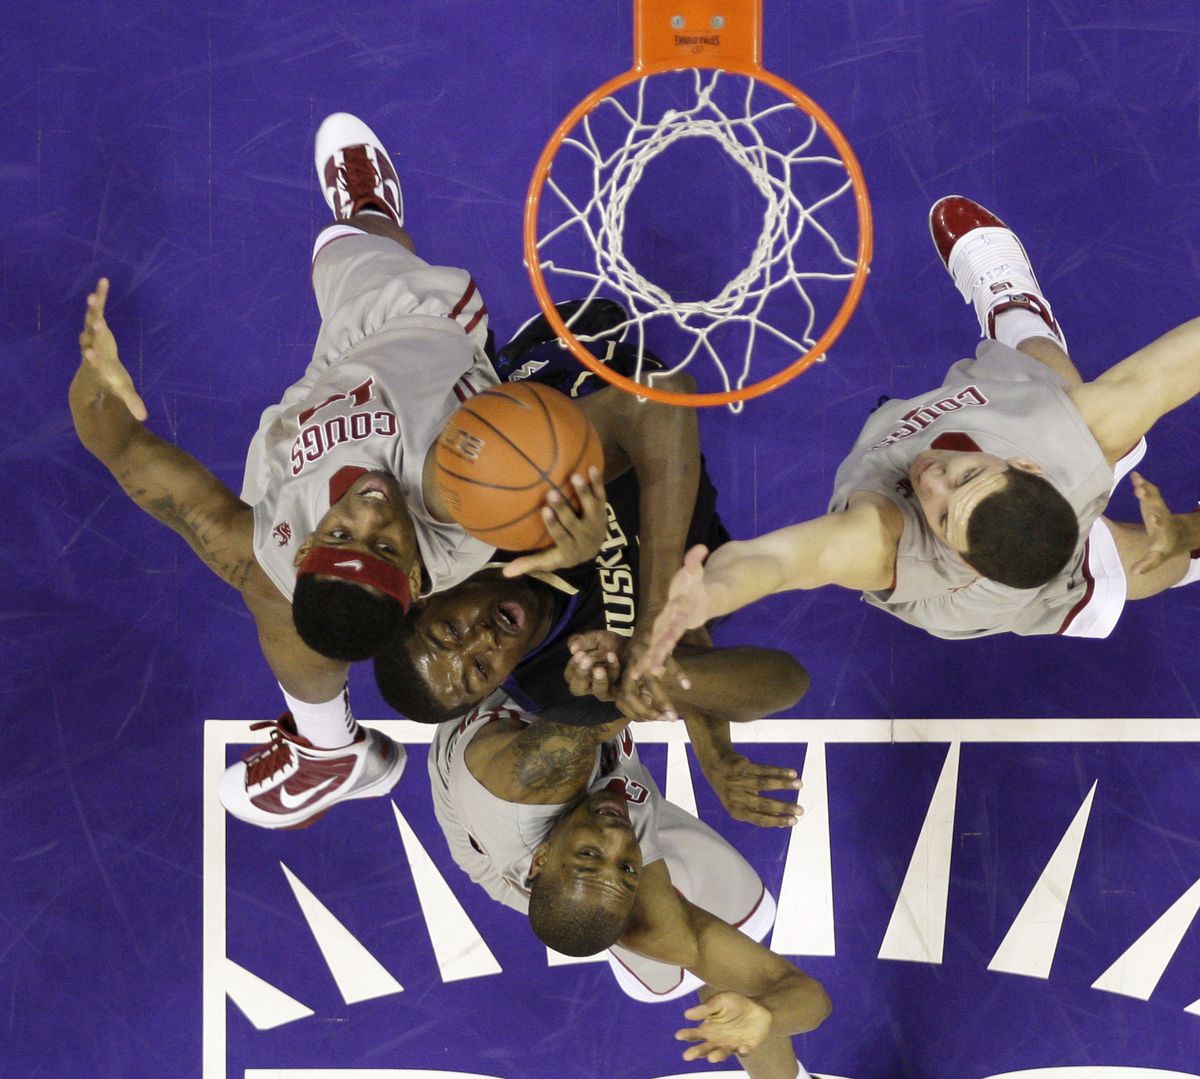 Washington’s Matthew Bryan-Amaning, center, battles for the ball with Washington State’s James Watson, left, Nik Koprivica, right, and Marcus Capers. (Associated Press)